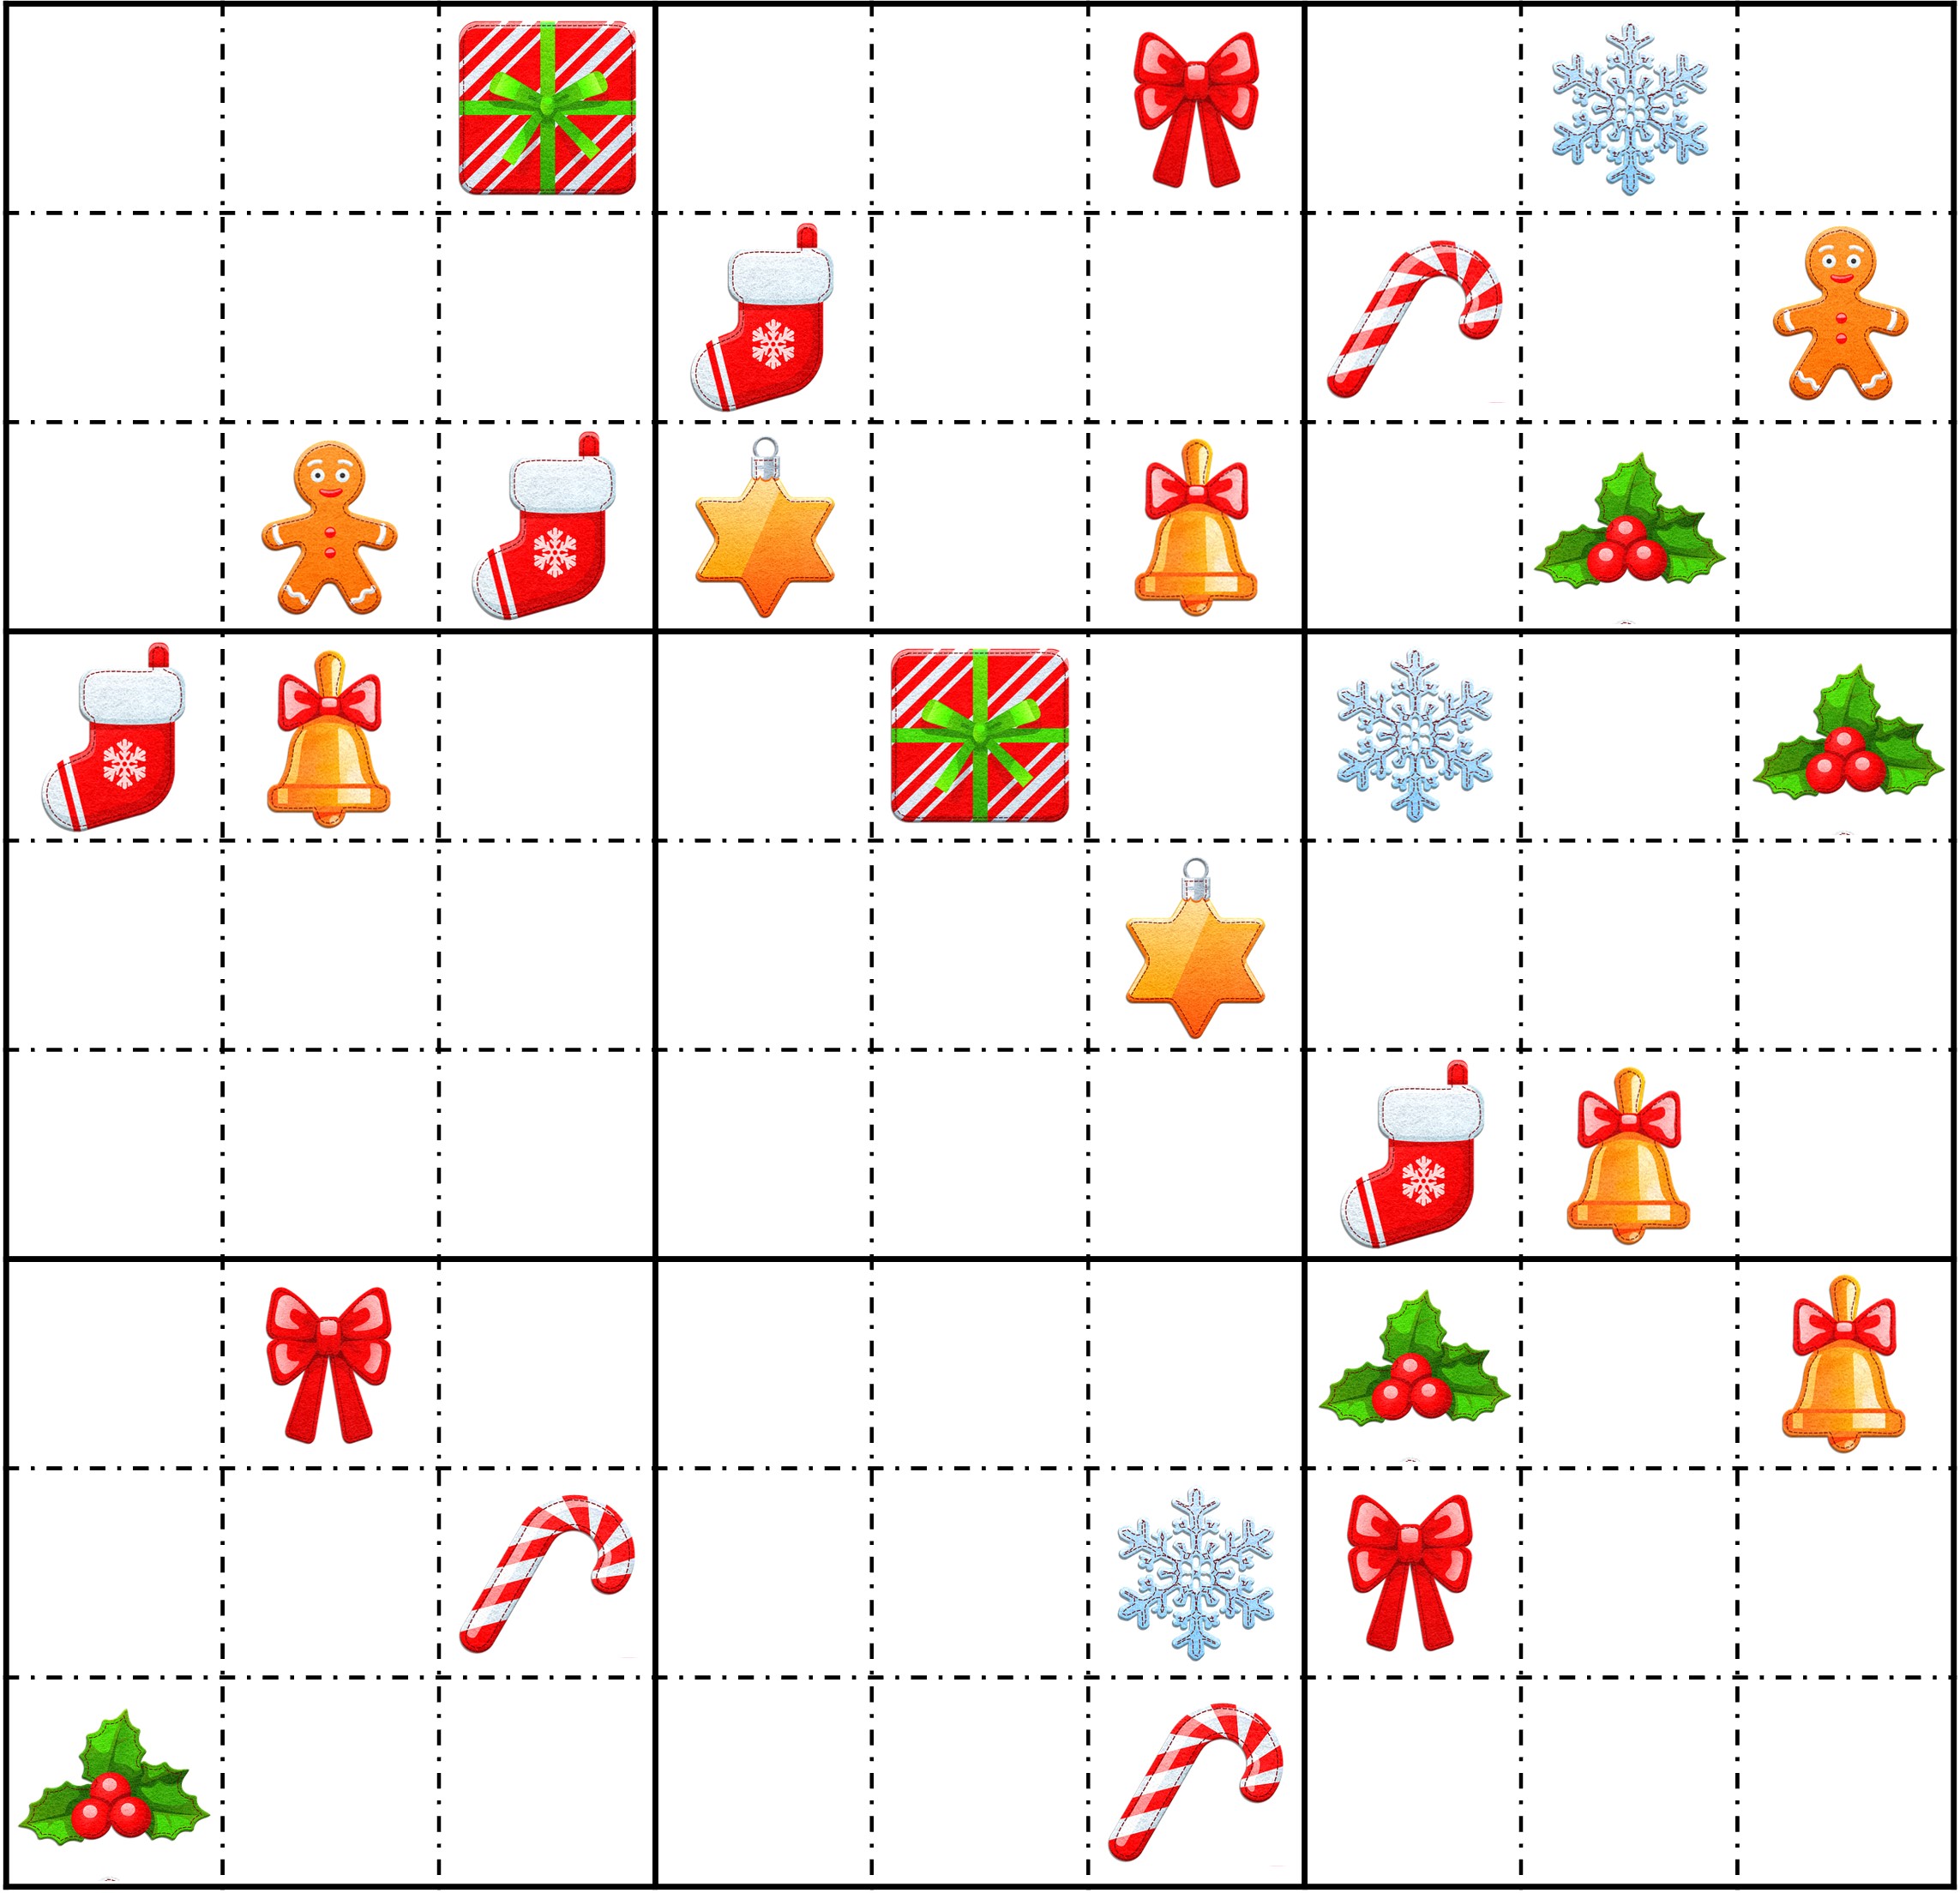 Seasonal Sudoku Puzzle Grid with Christmas images instead of numbers. A screen-reader friendly number version of this grid is available below.